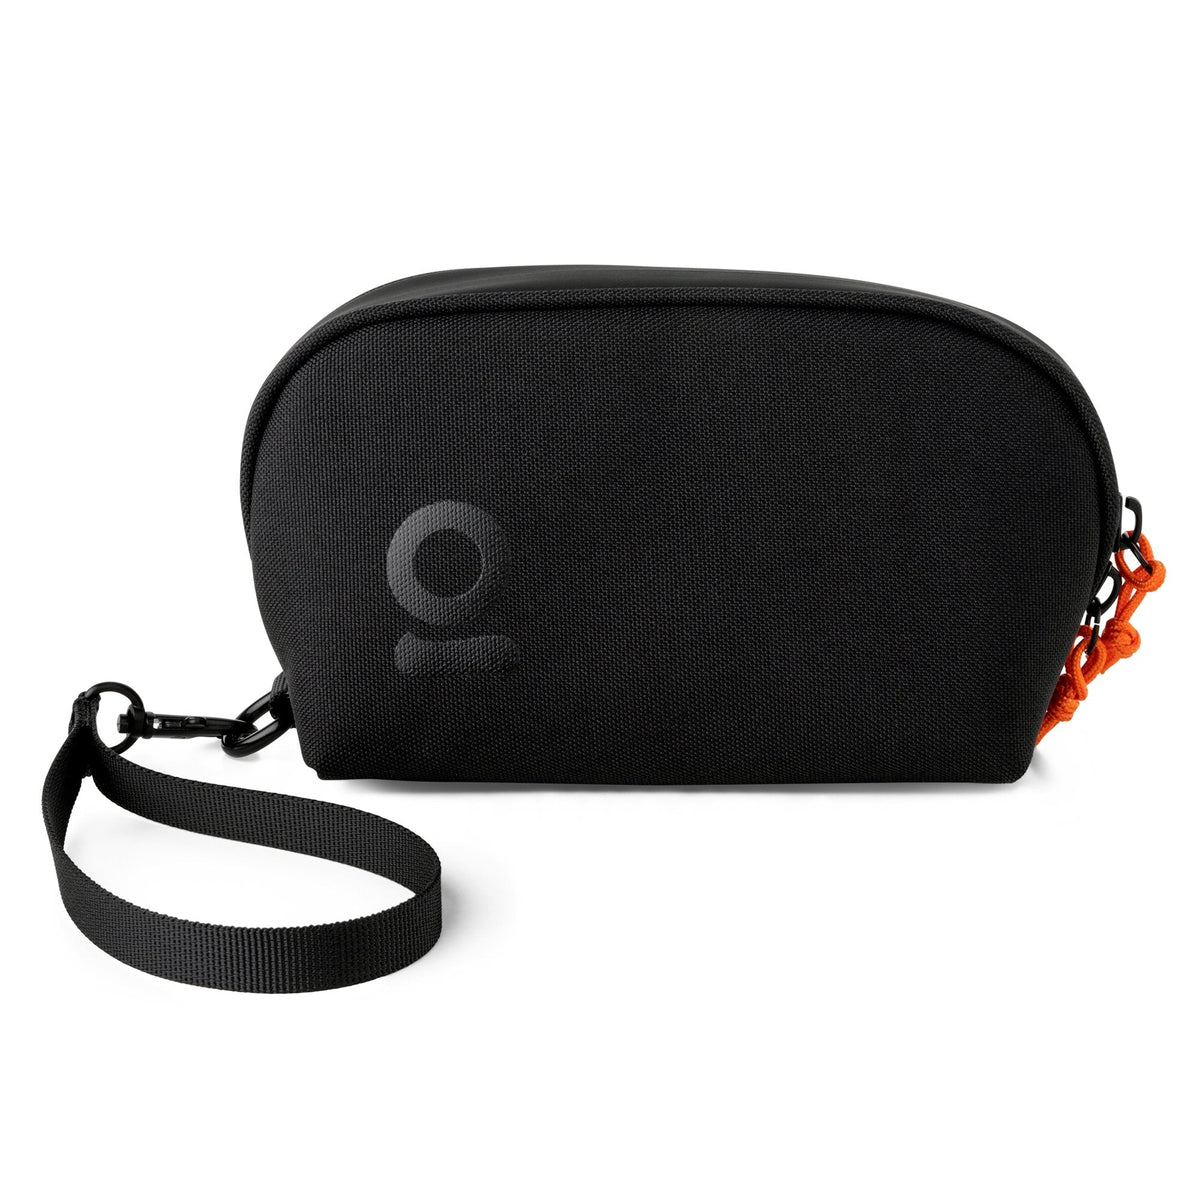 Ongrok Carbon-lined Smell Proof Wrist Bag